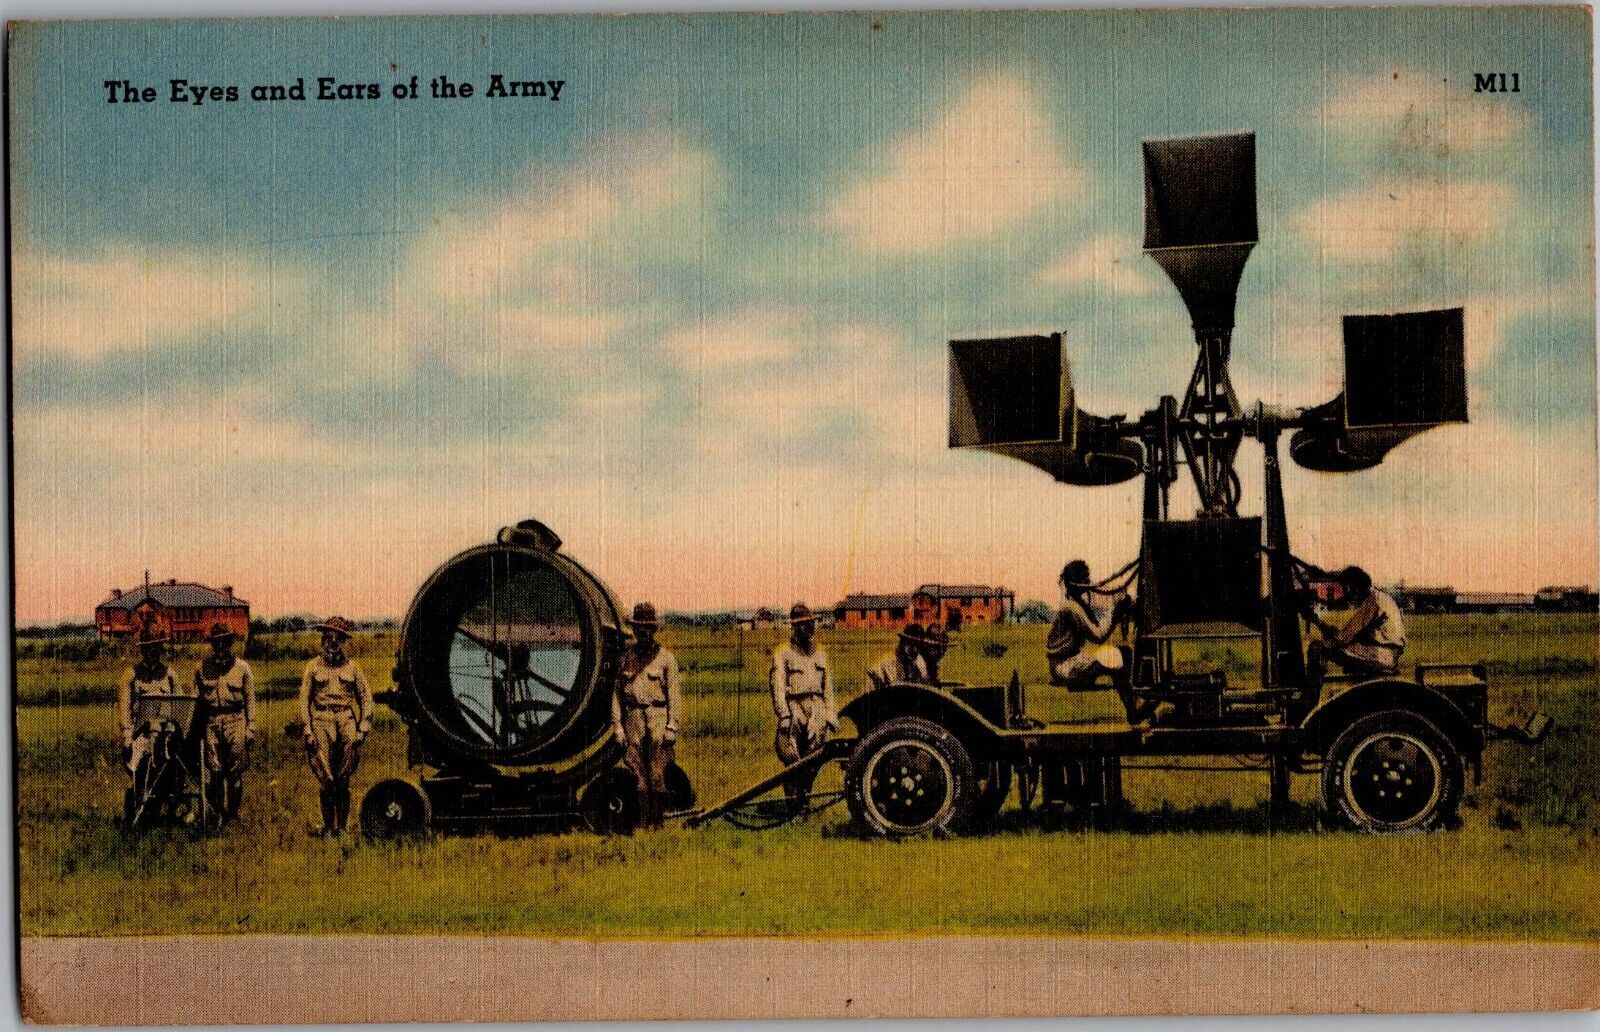 1940s U.S. Army Eyes & Ears of the Army Vintage Linen Postcard Military